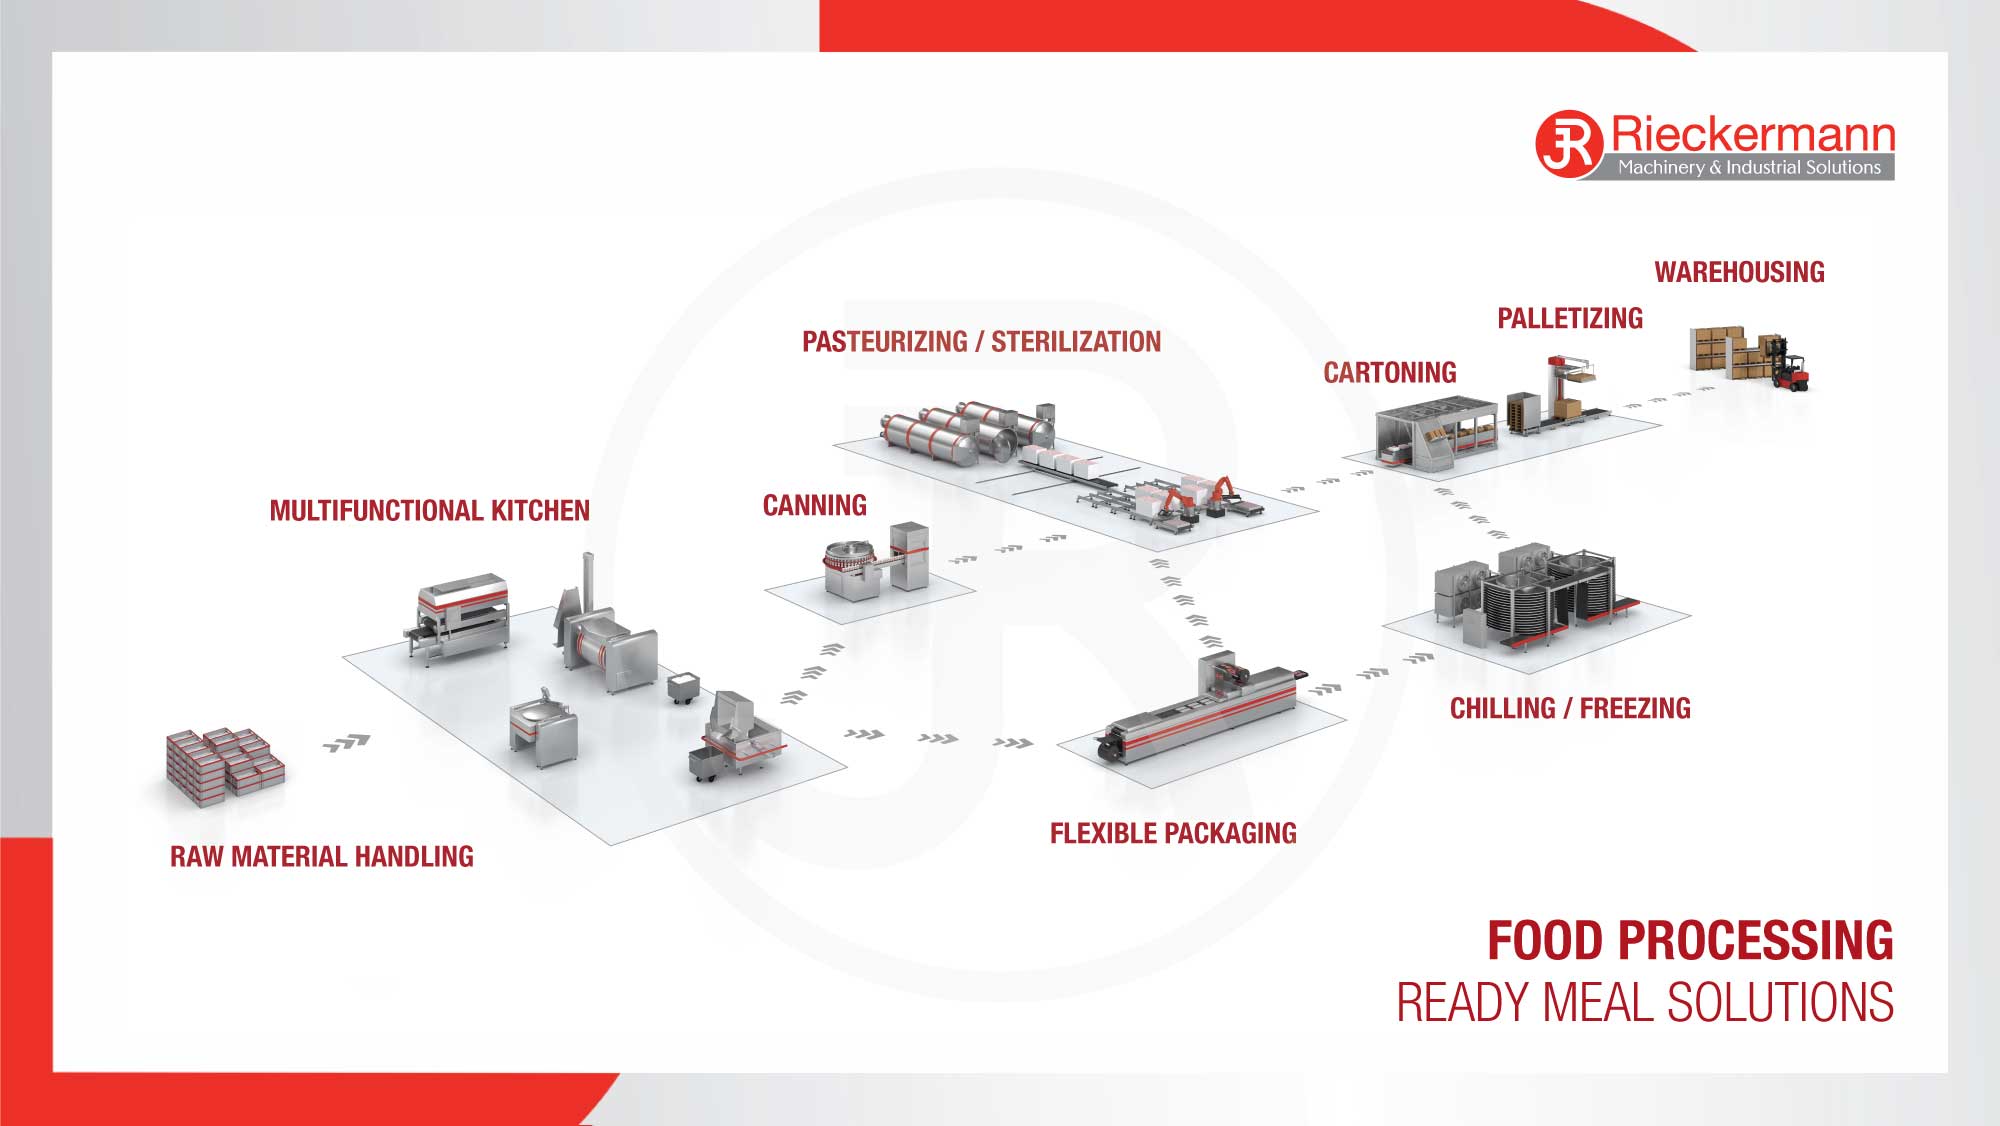 Food Processing - Ready Meal Solutions